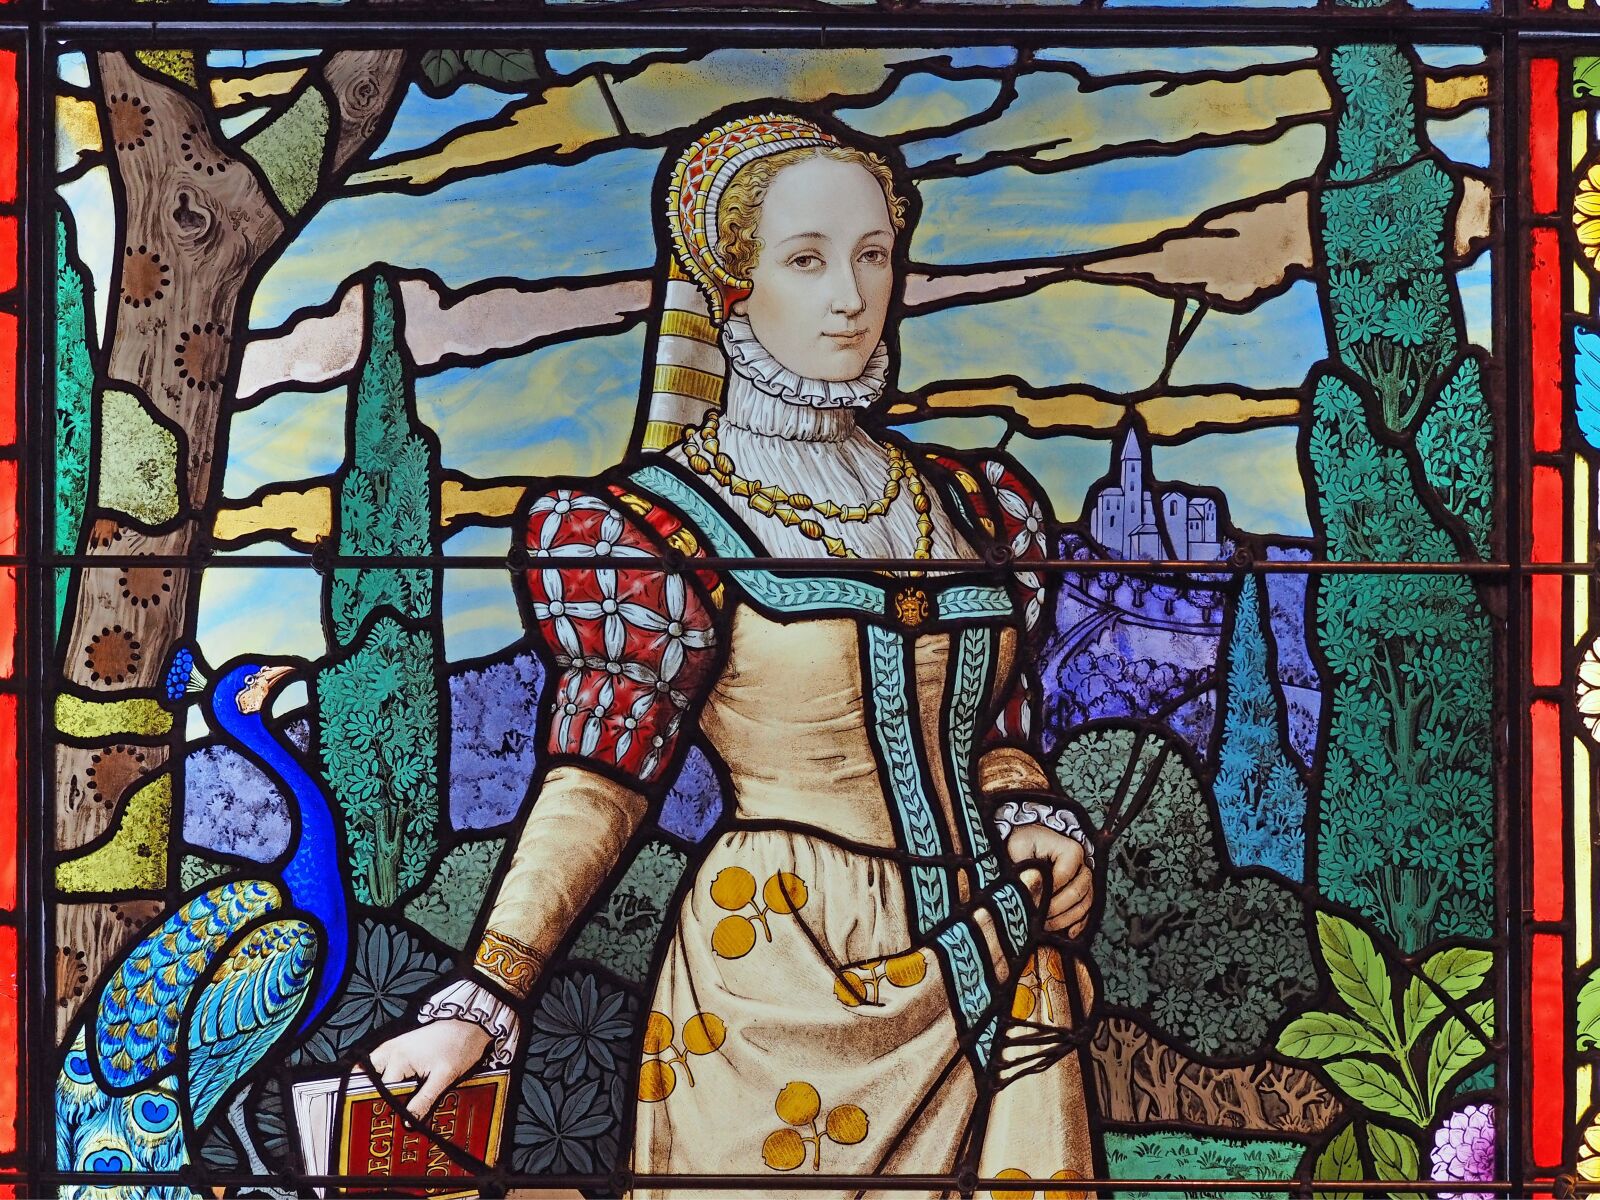 OLYMPUS 50mm Lens sample photo. Stained glass windows, museum photography